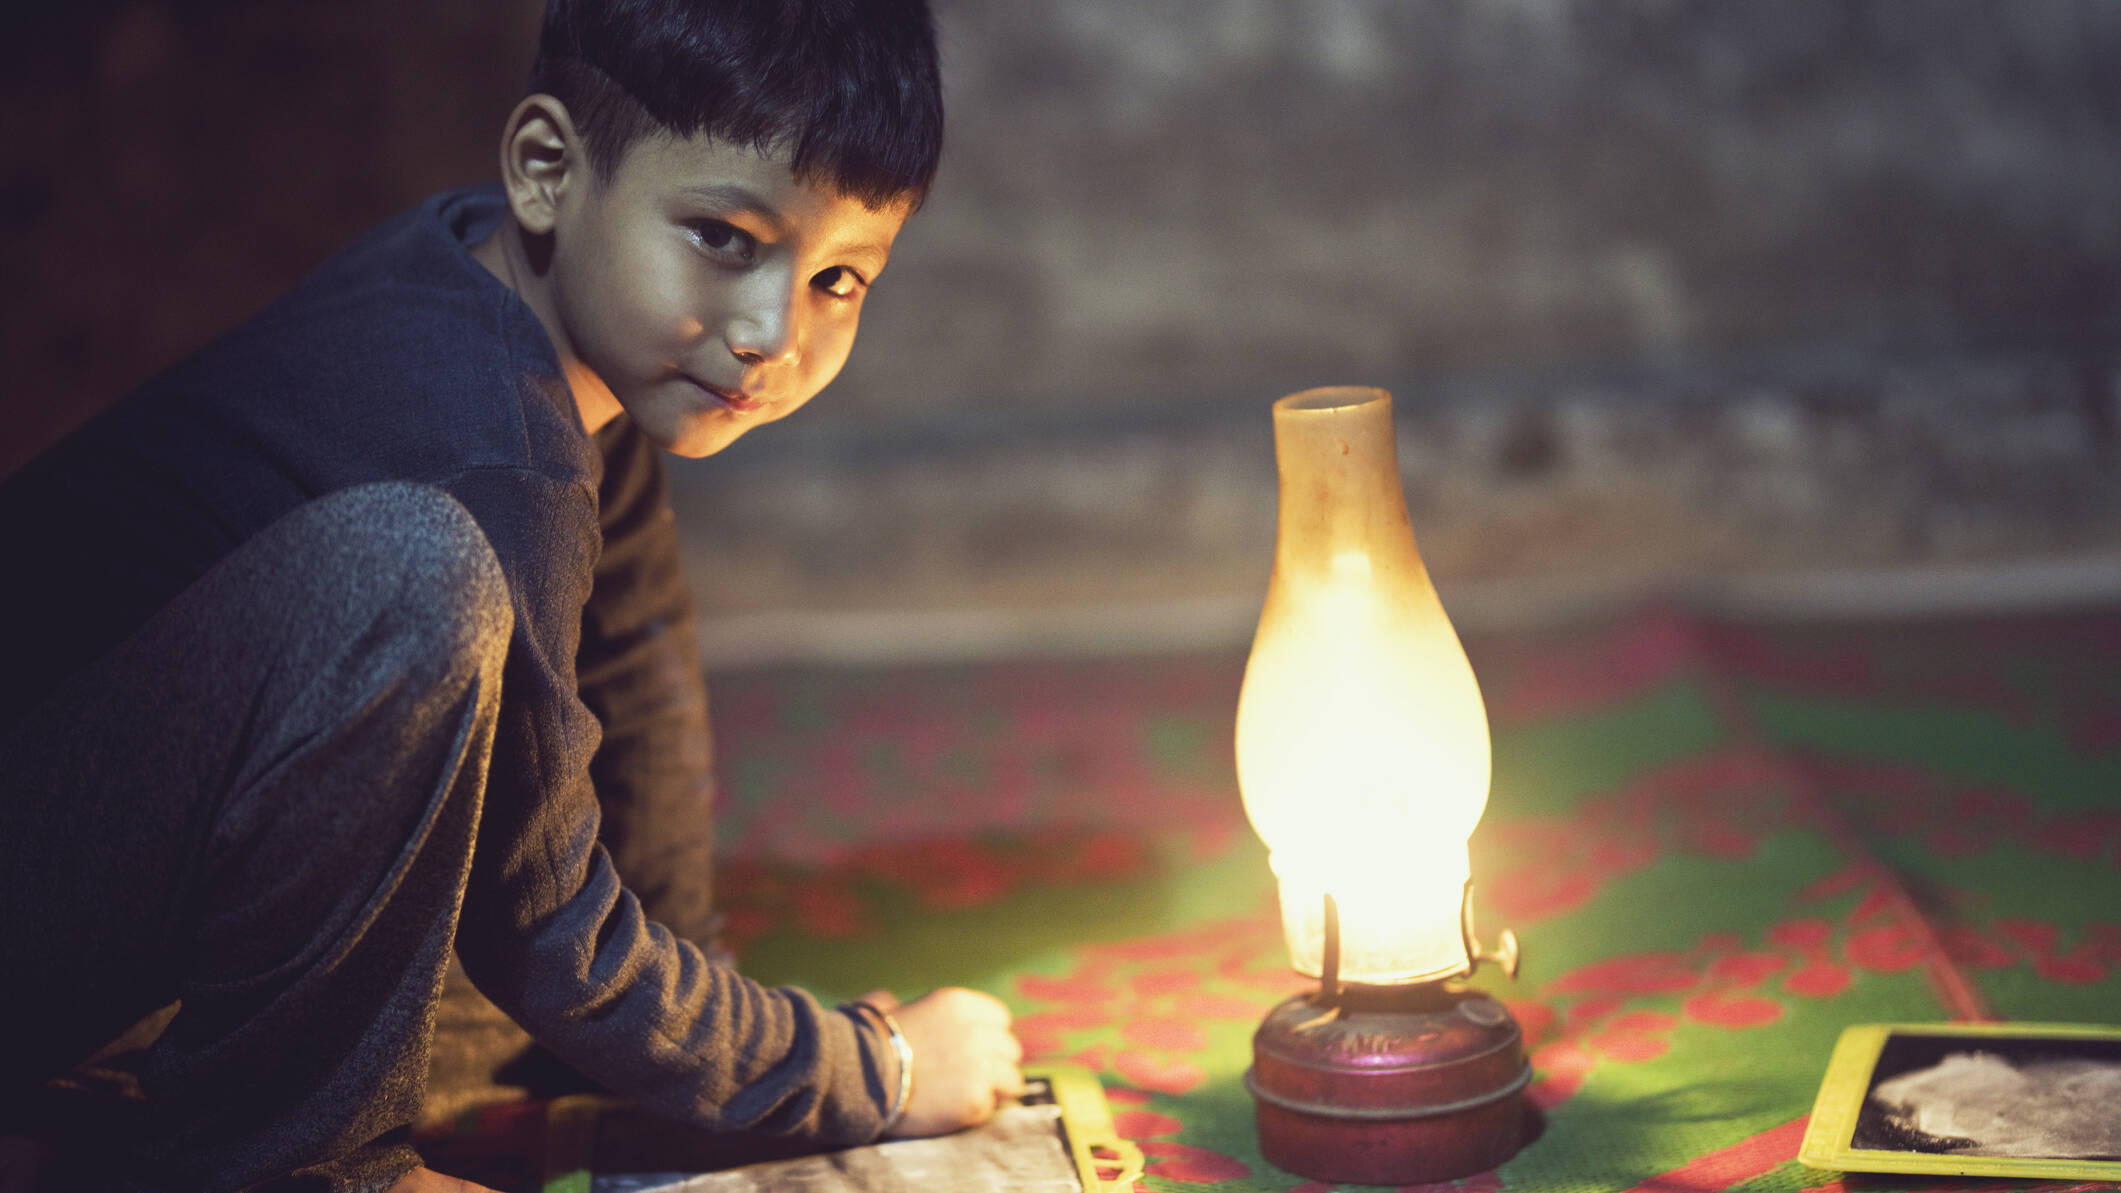 young boy with chalkboard illuminated by oil lamp